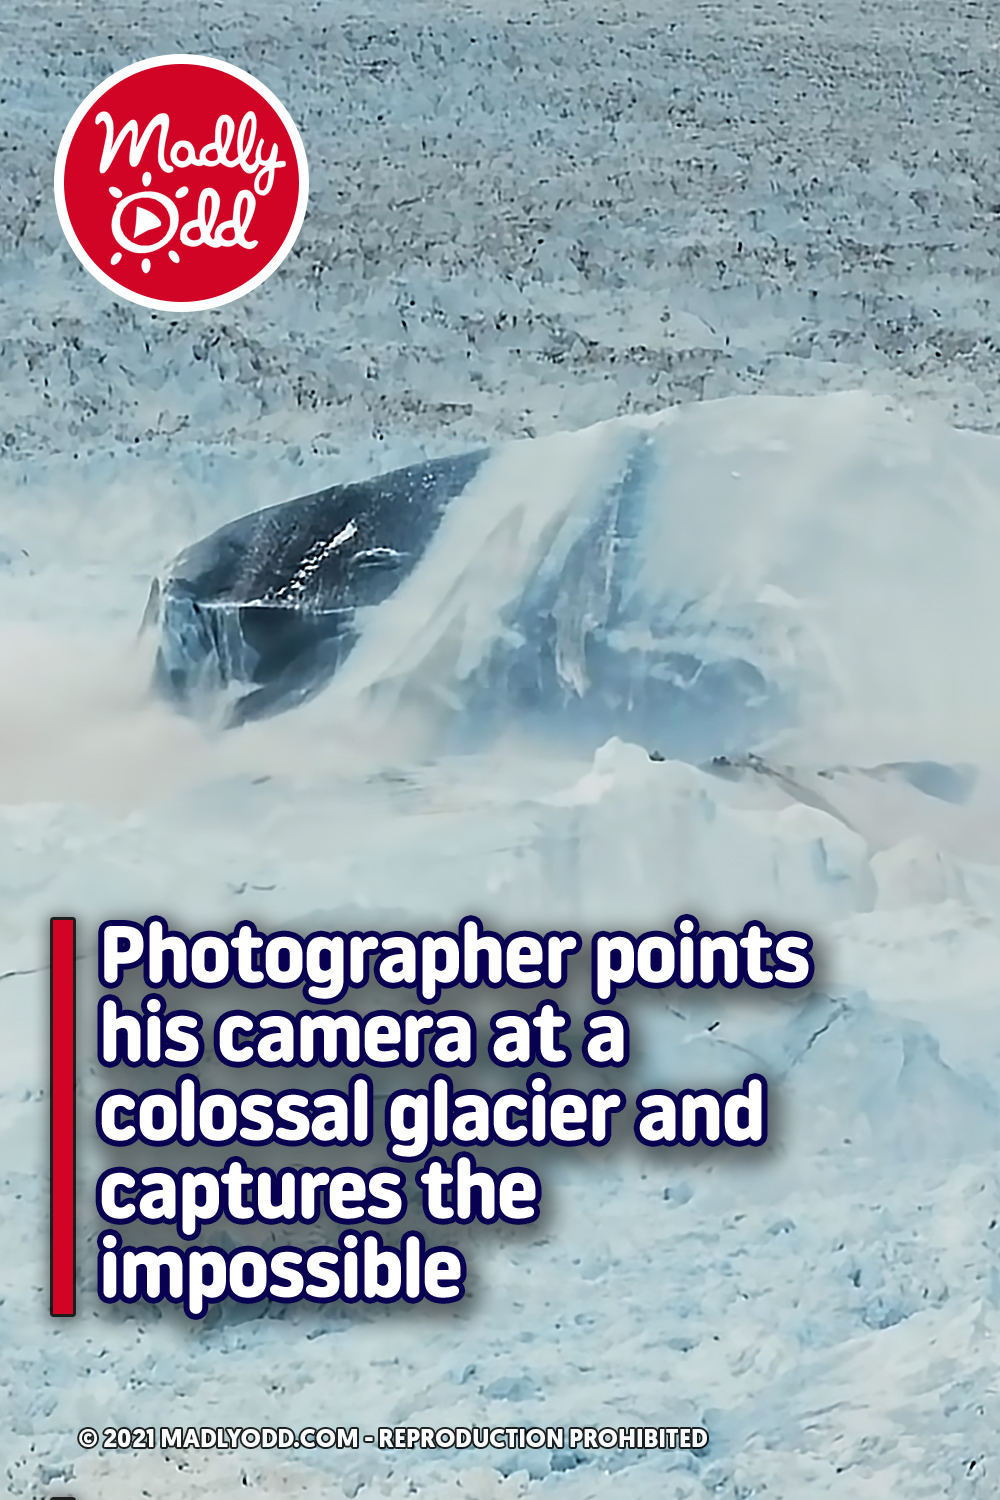 Photographer points his camera at a colossal glacier and captures the impossible